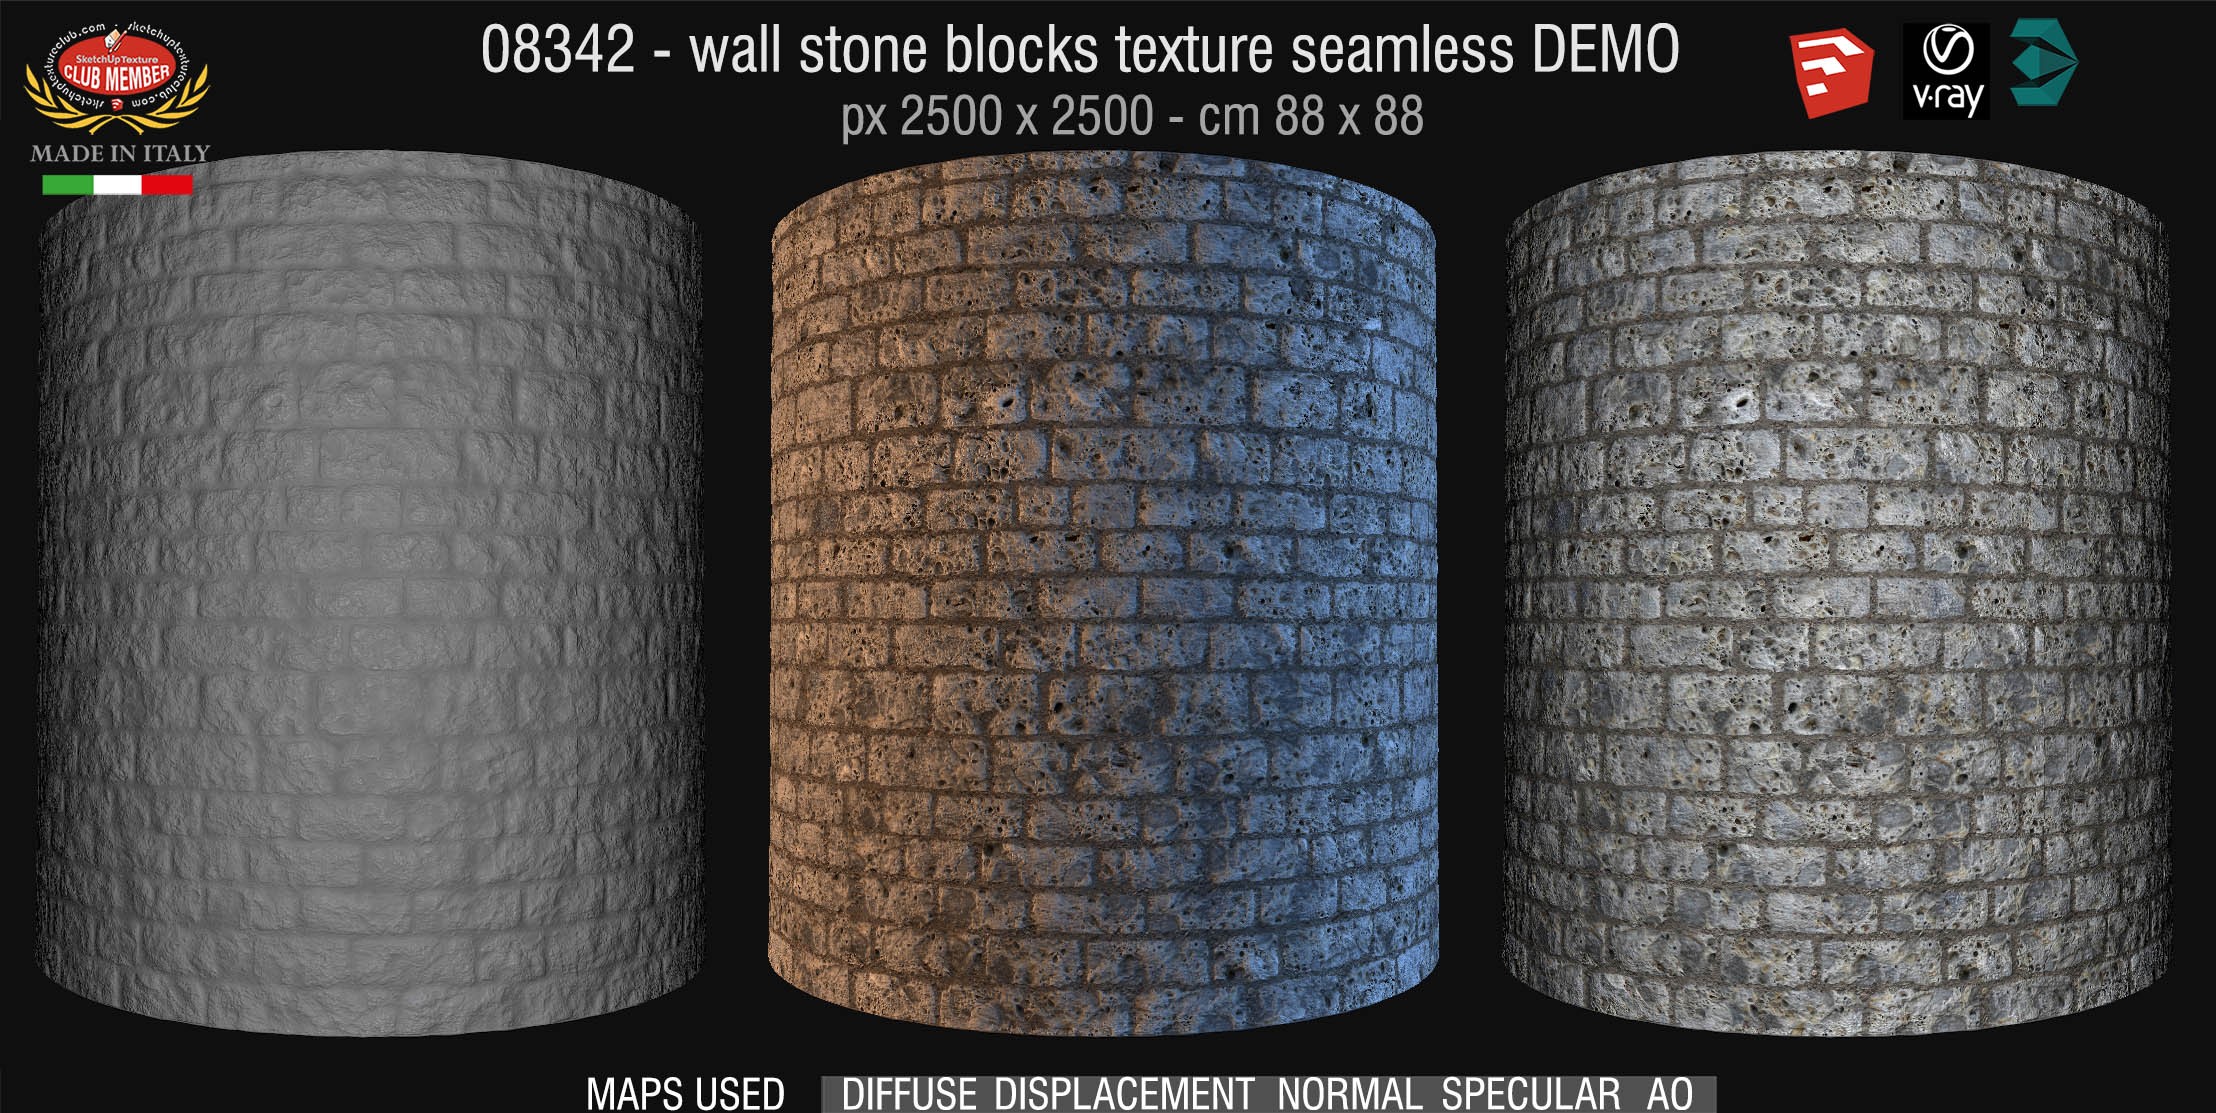 08342 HR Wall stone with regular blocks texture + maps DEMO